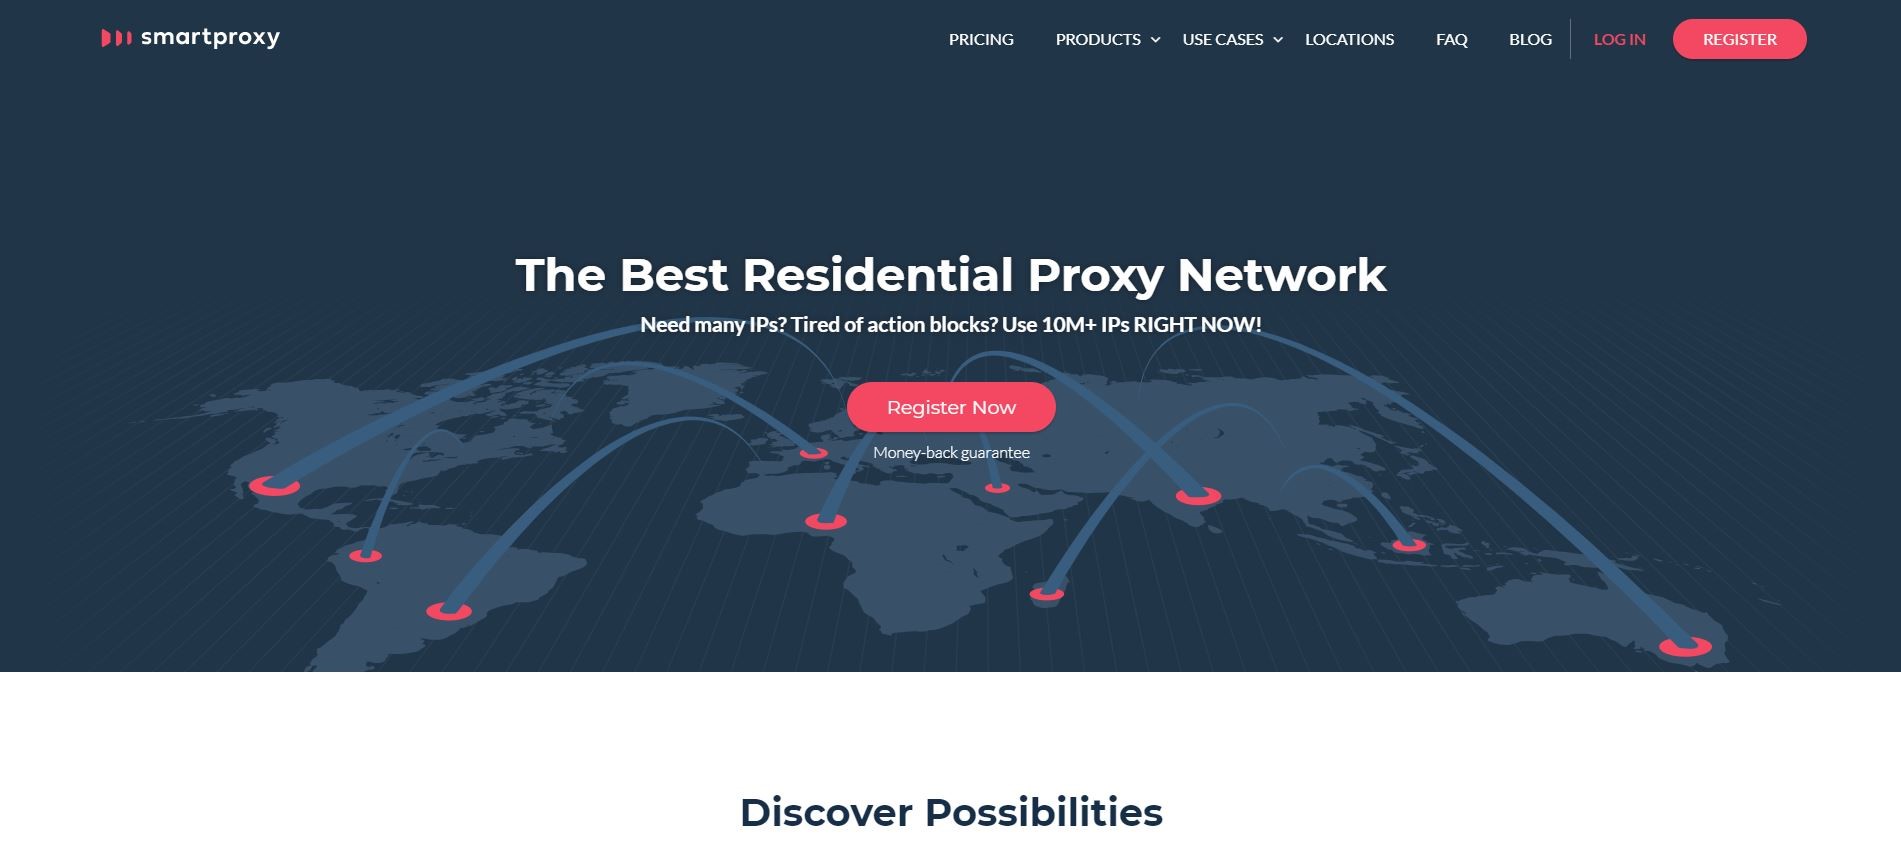 The best residential Proxy Network